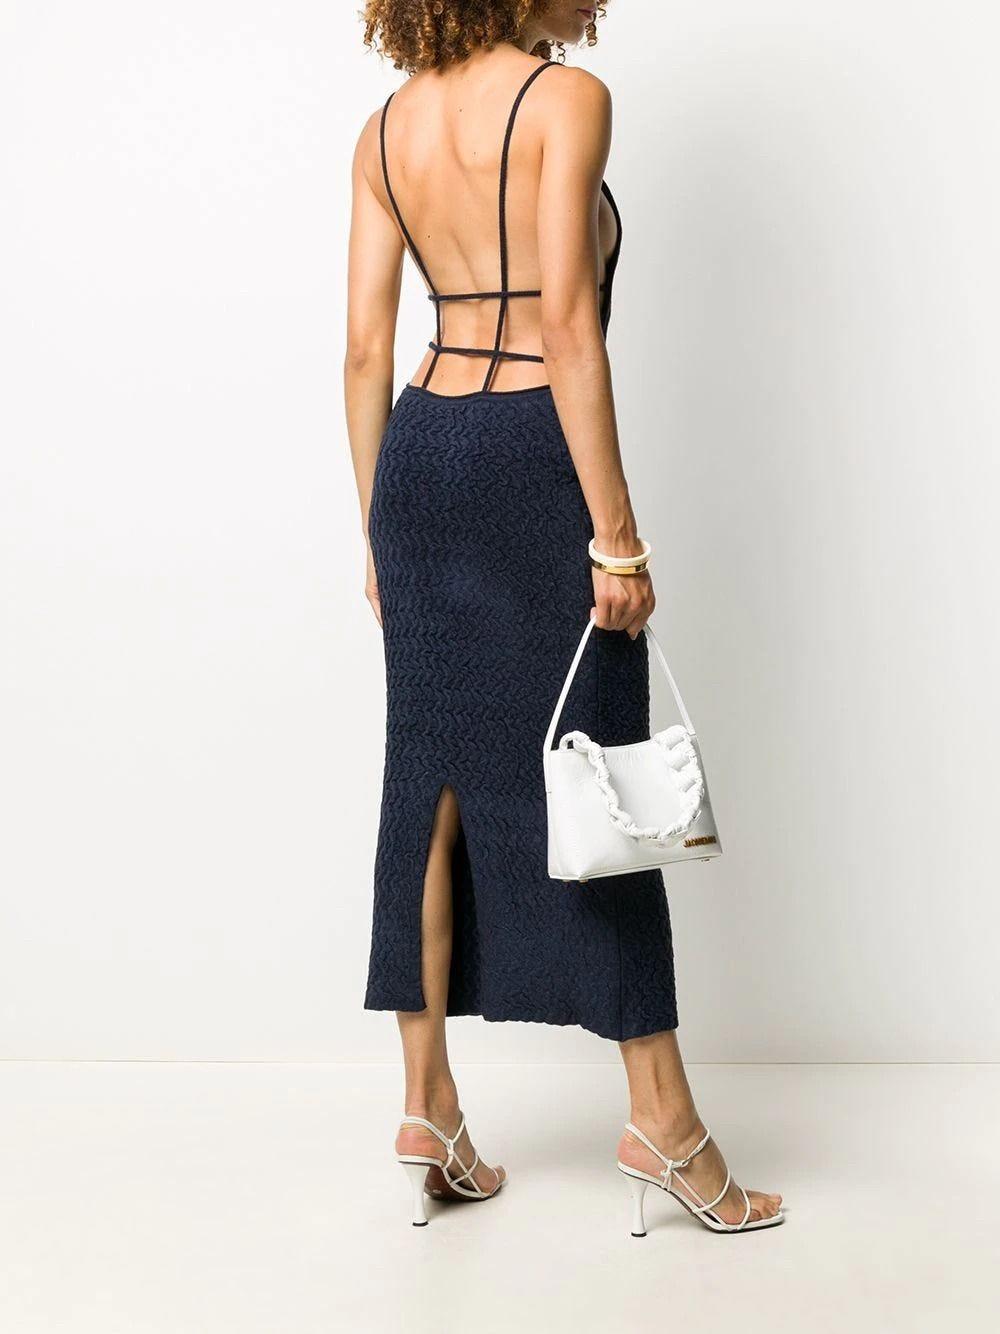 Jacquemus La Robe Maille Velours Dress in Blue | Lyst